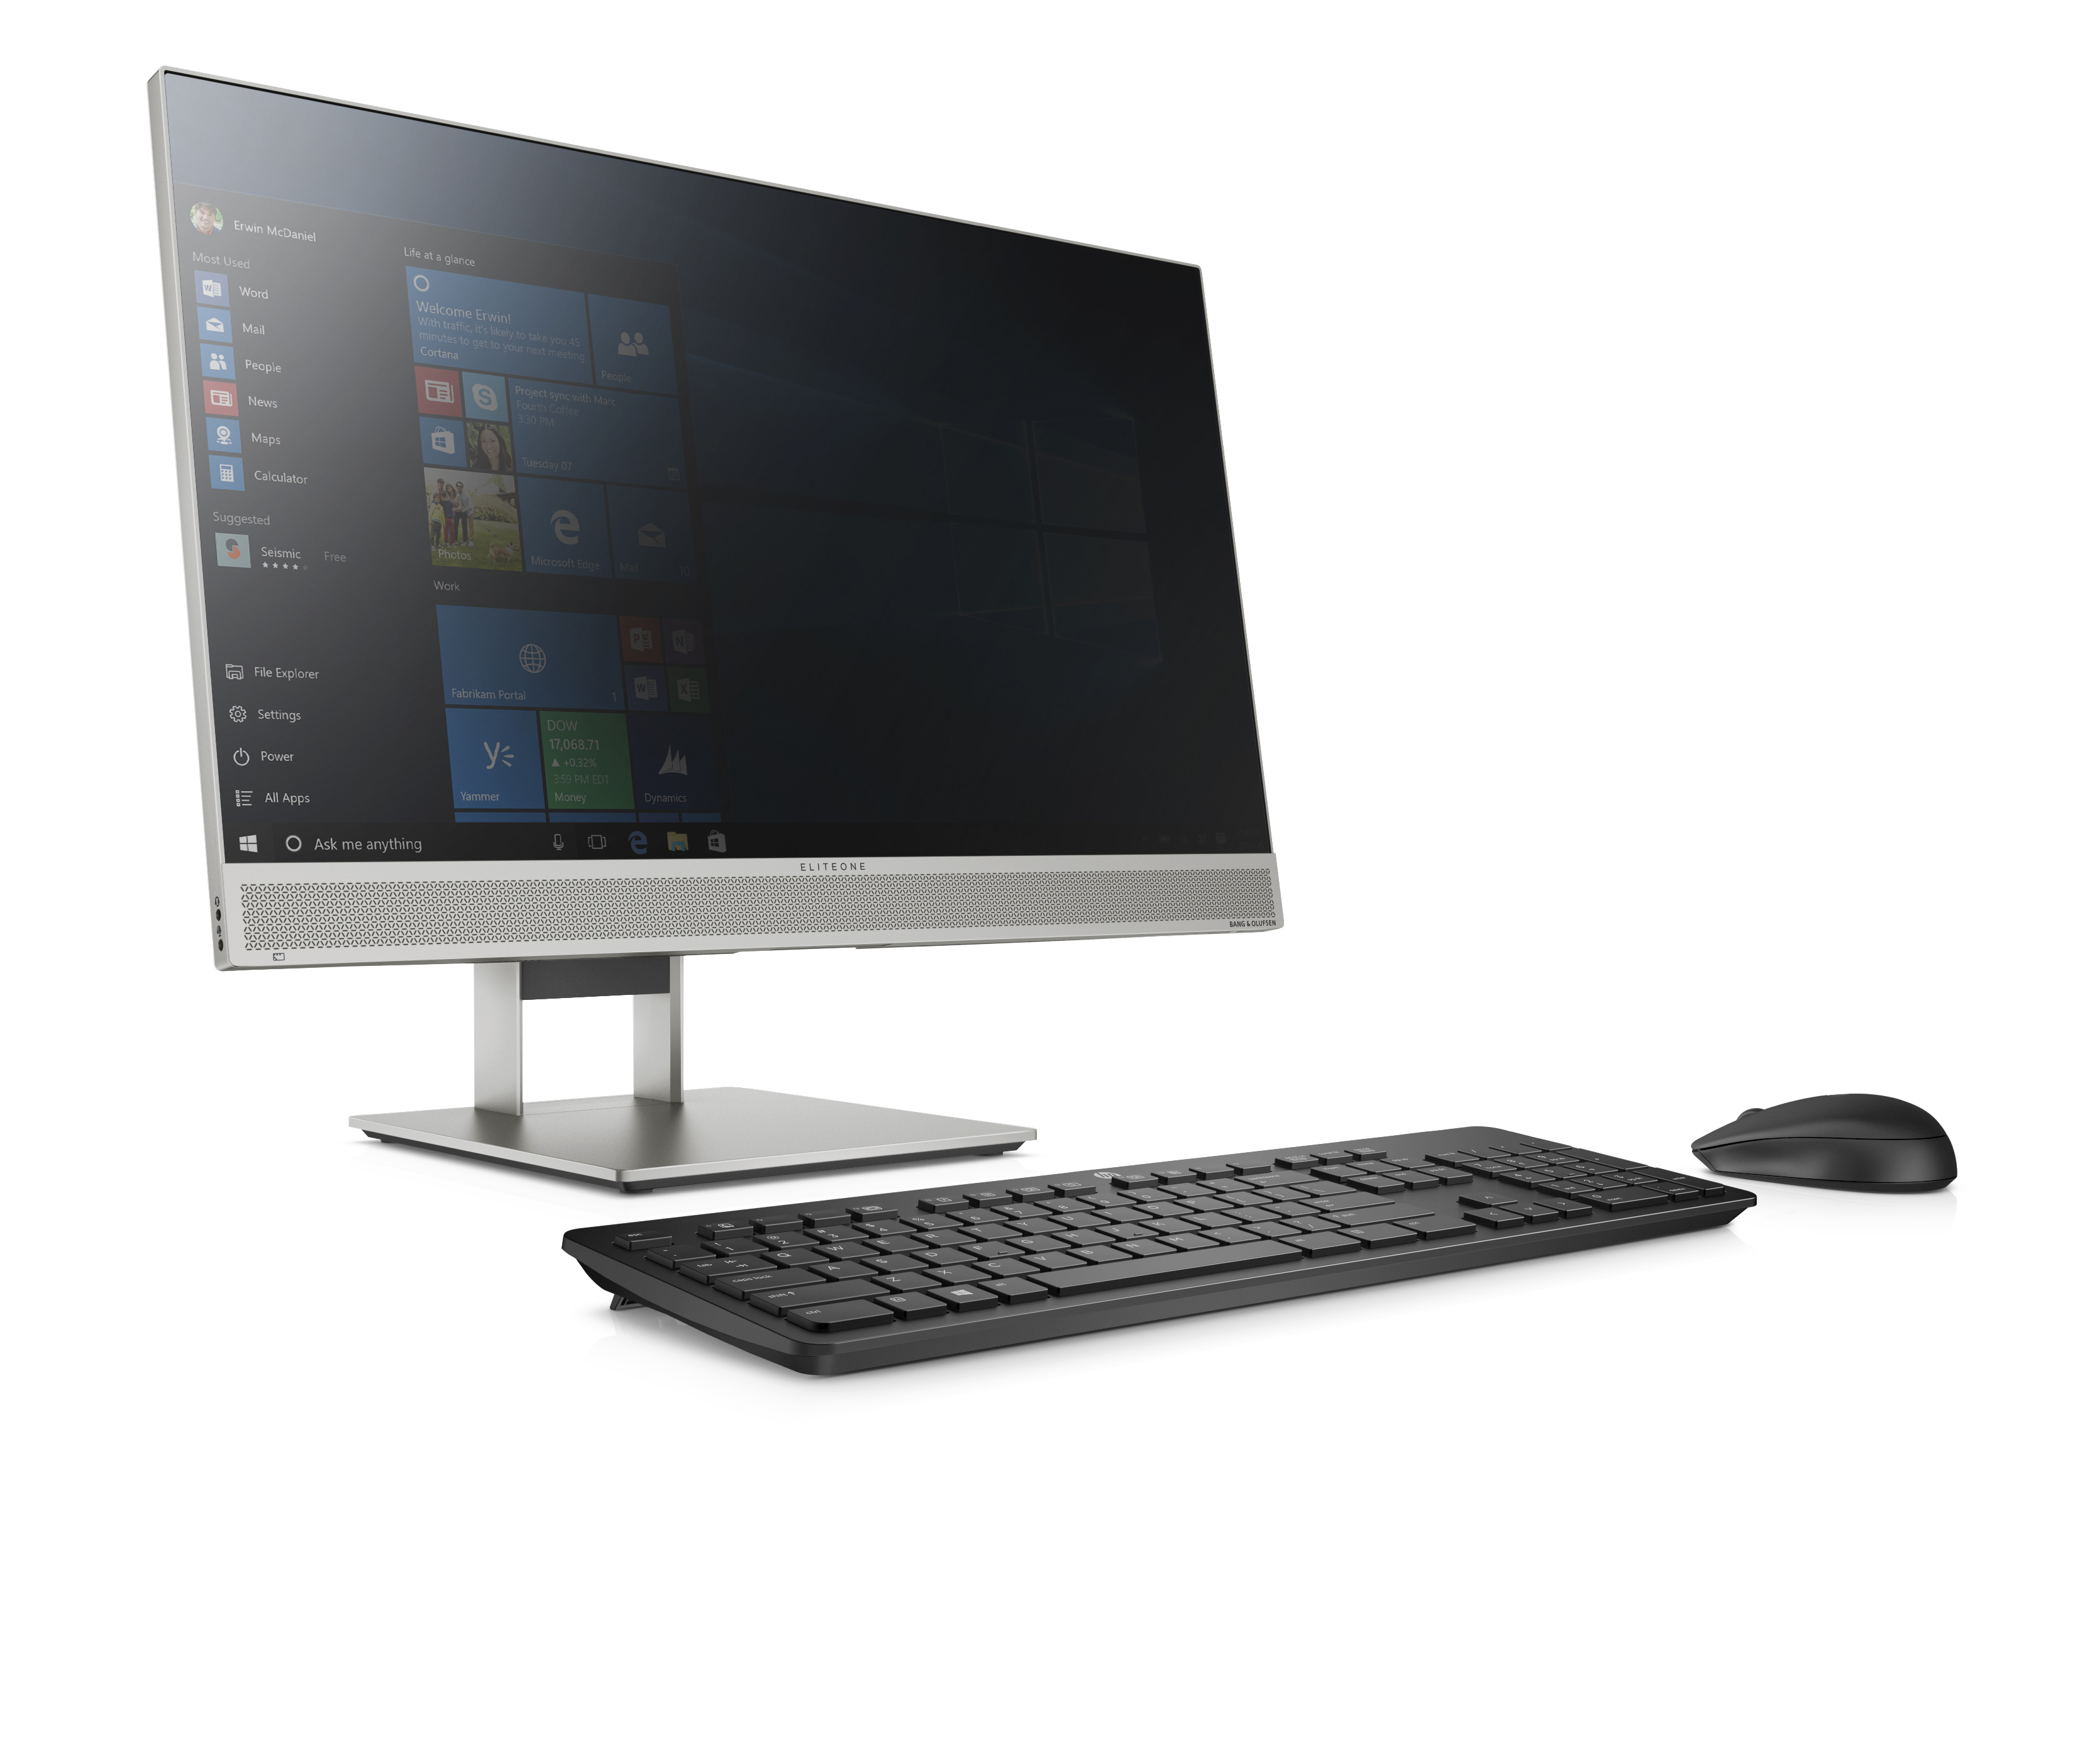 hp launches new monitors and all in one ces 2019 eliteone 800 g5 aio front right w sure view